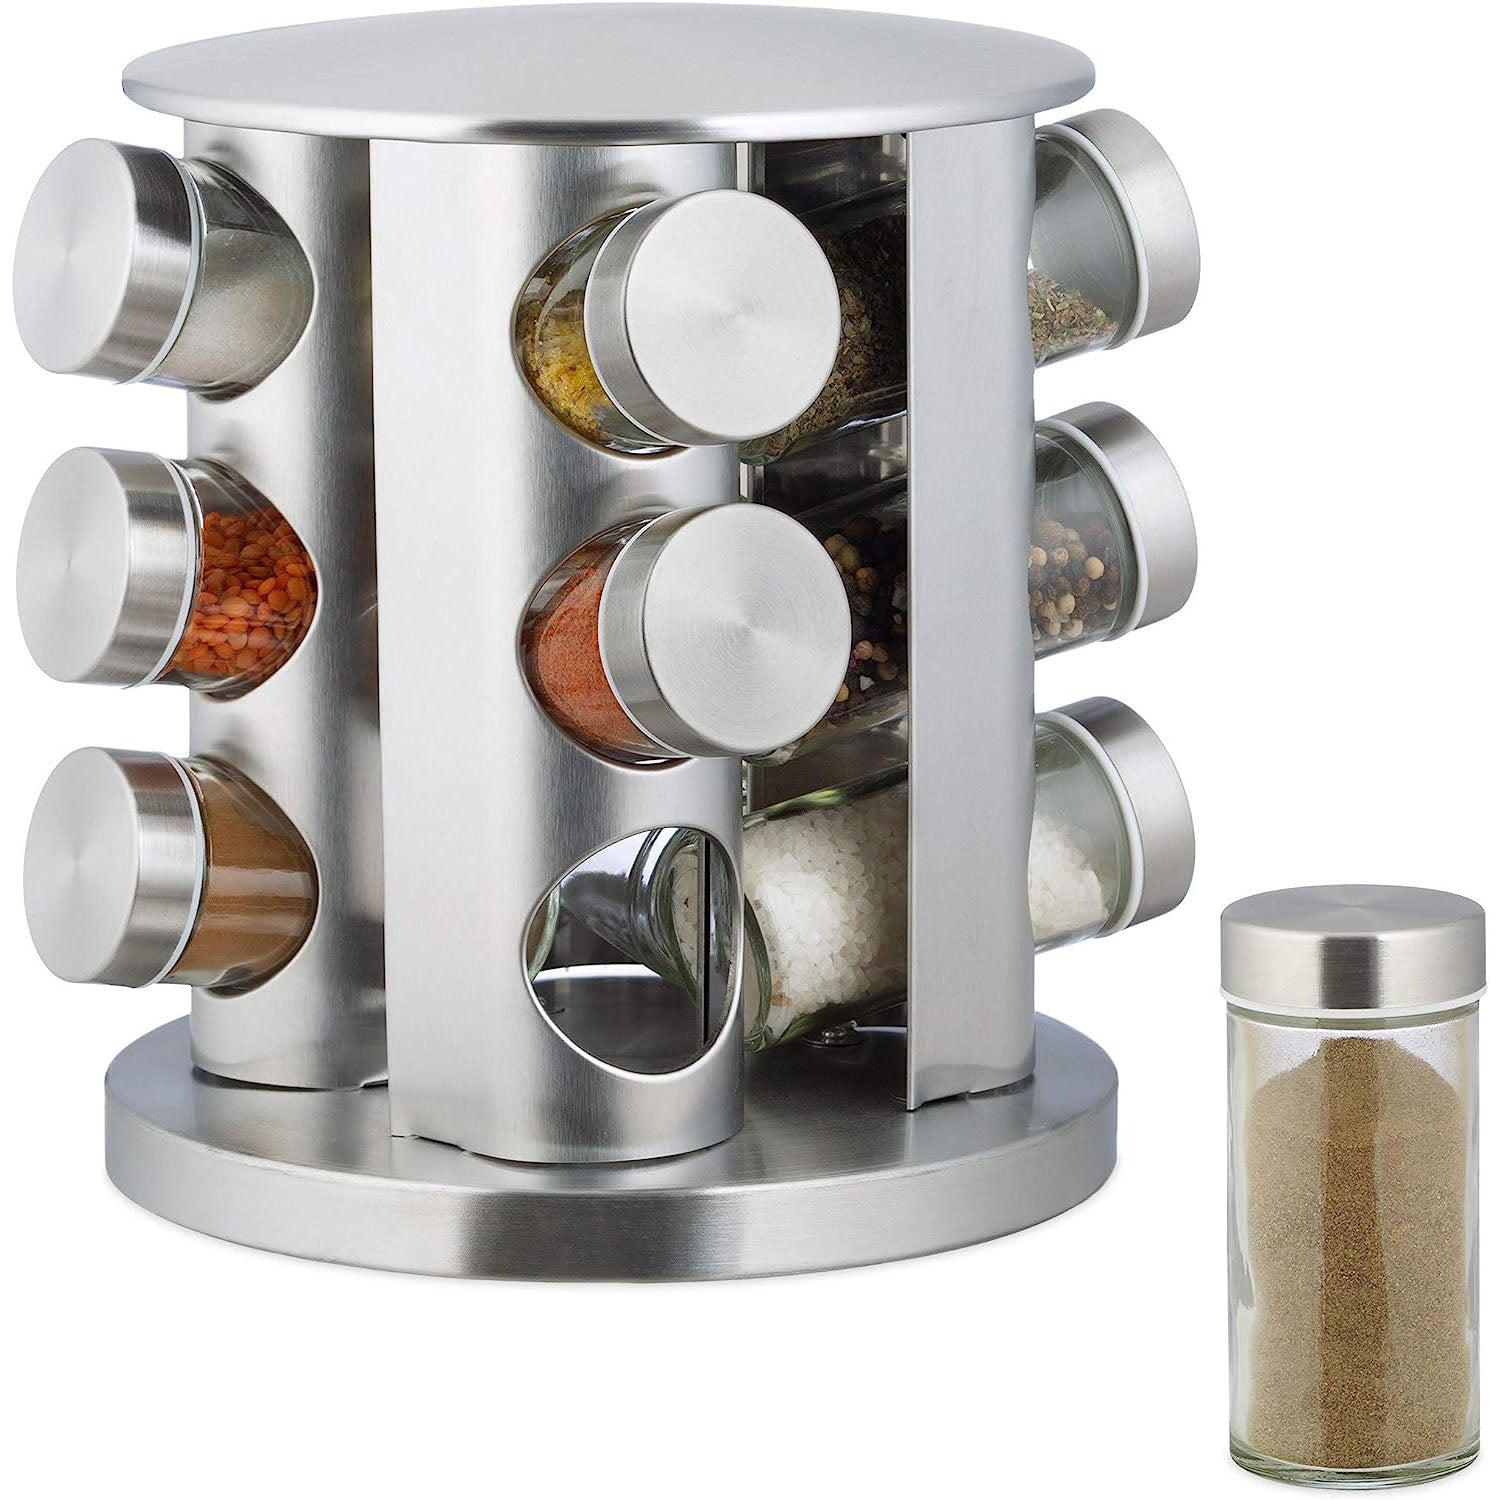 DS BS Revolving 12-Jar Countertop Spice Rack Stainless Steel